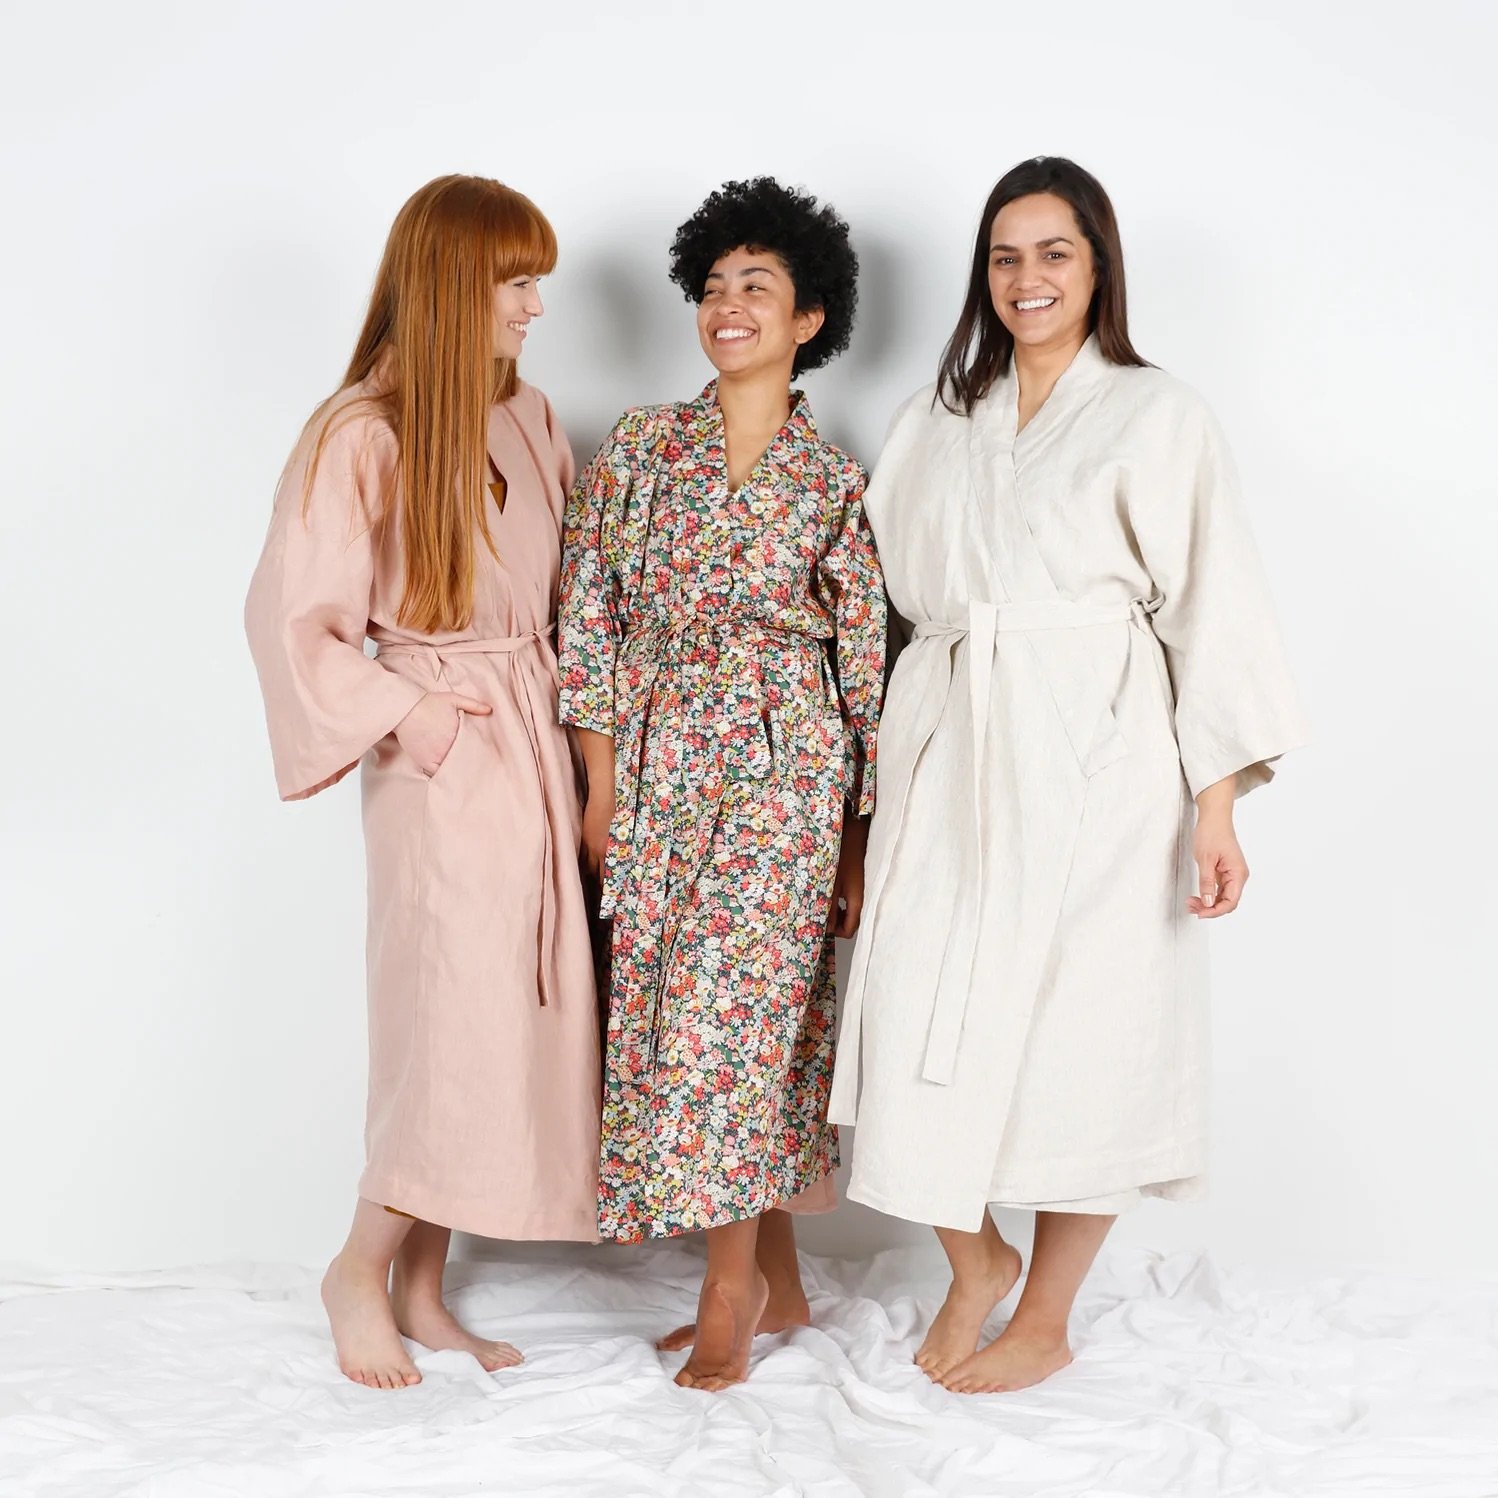 Dressing Gowns/Robes - All Things Lounge - Pattern Tuesday — Audsley Sarah  Designs